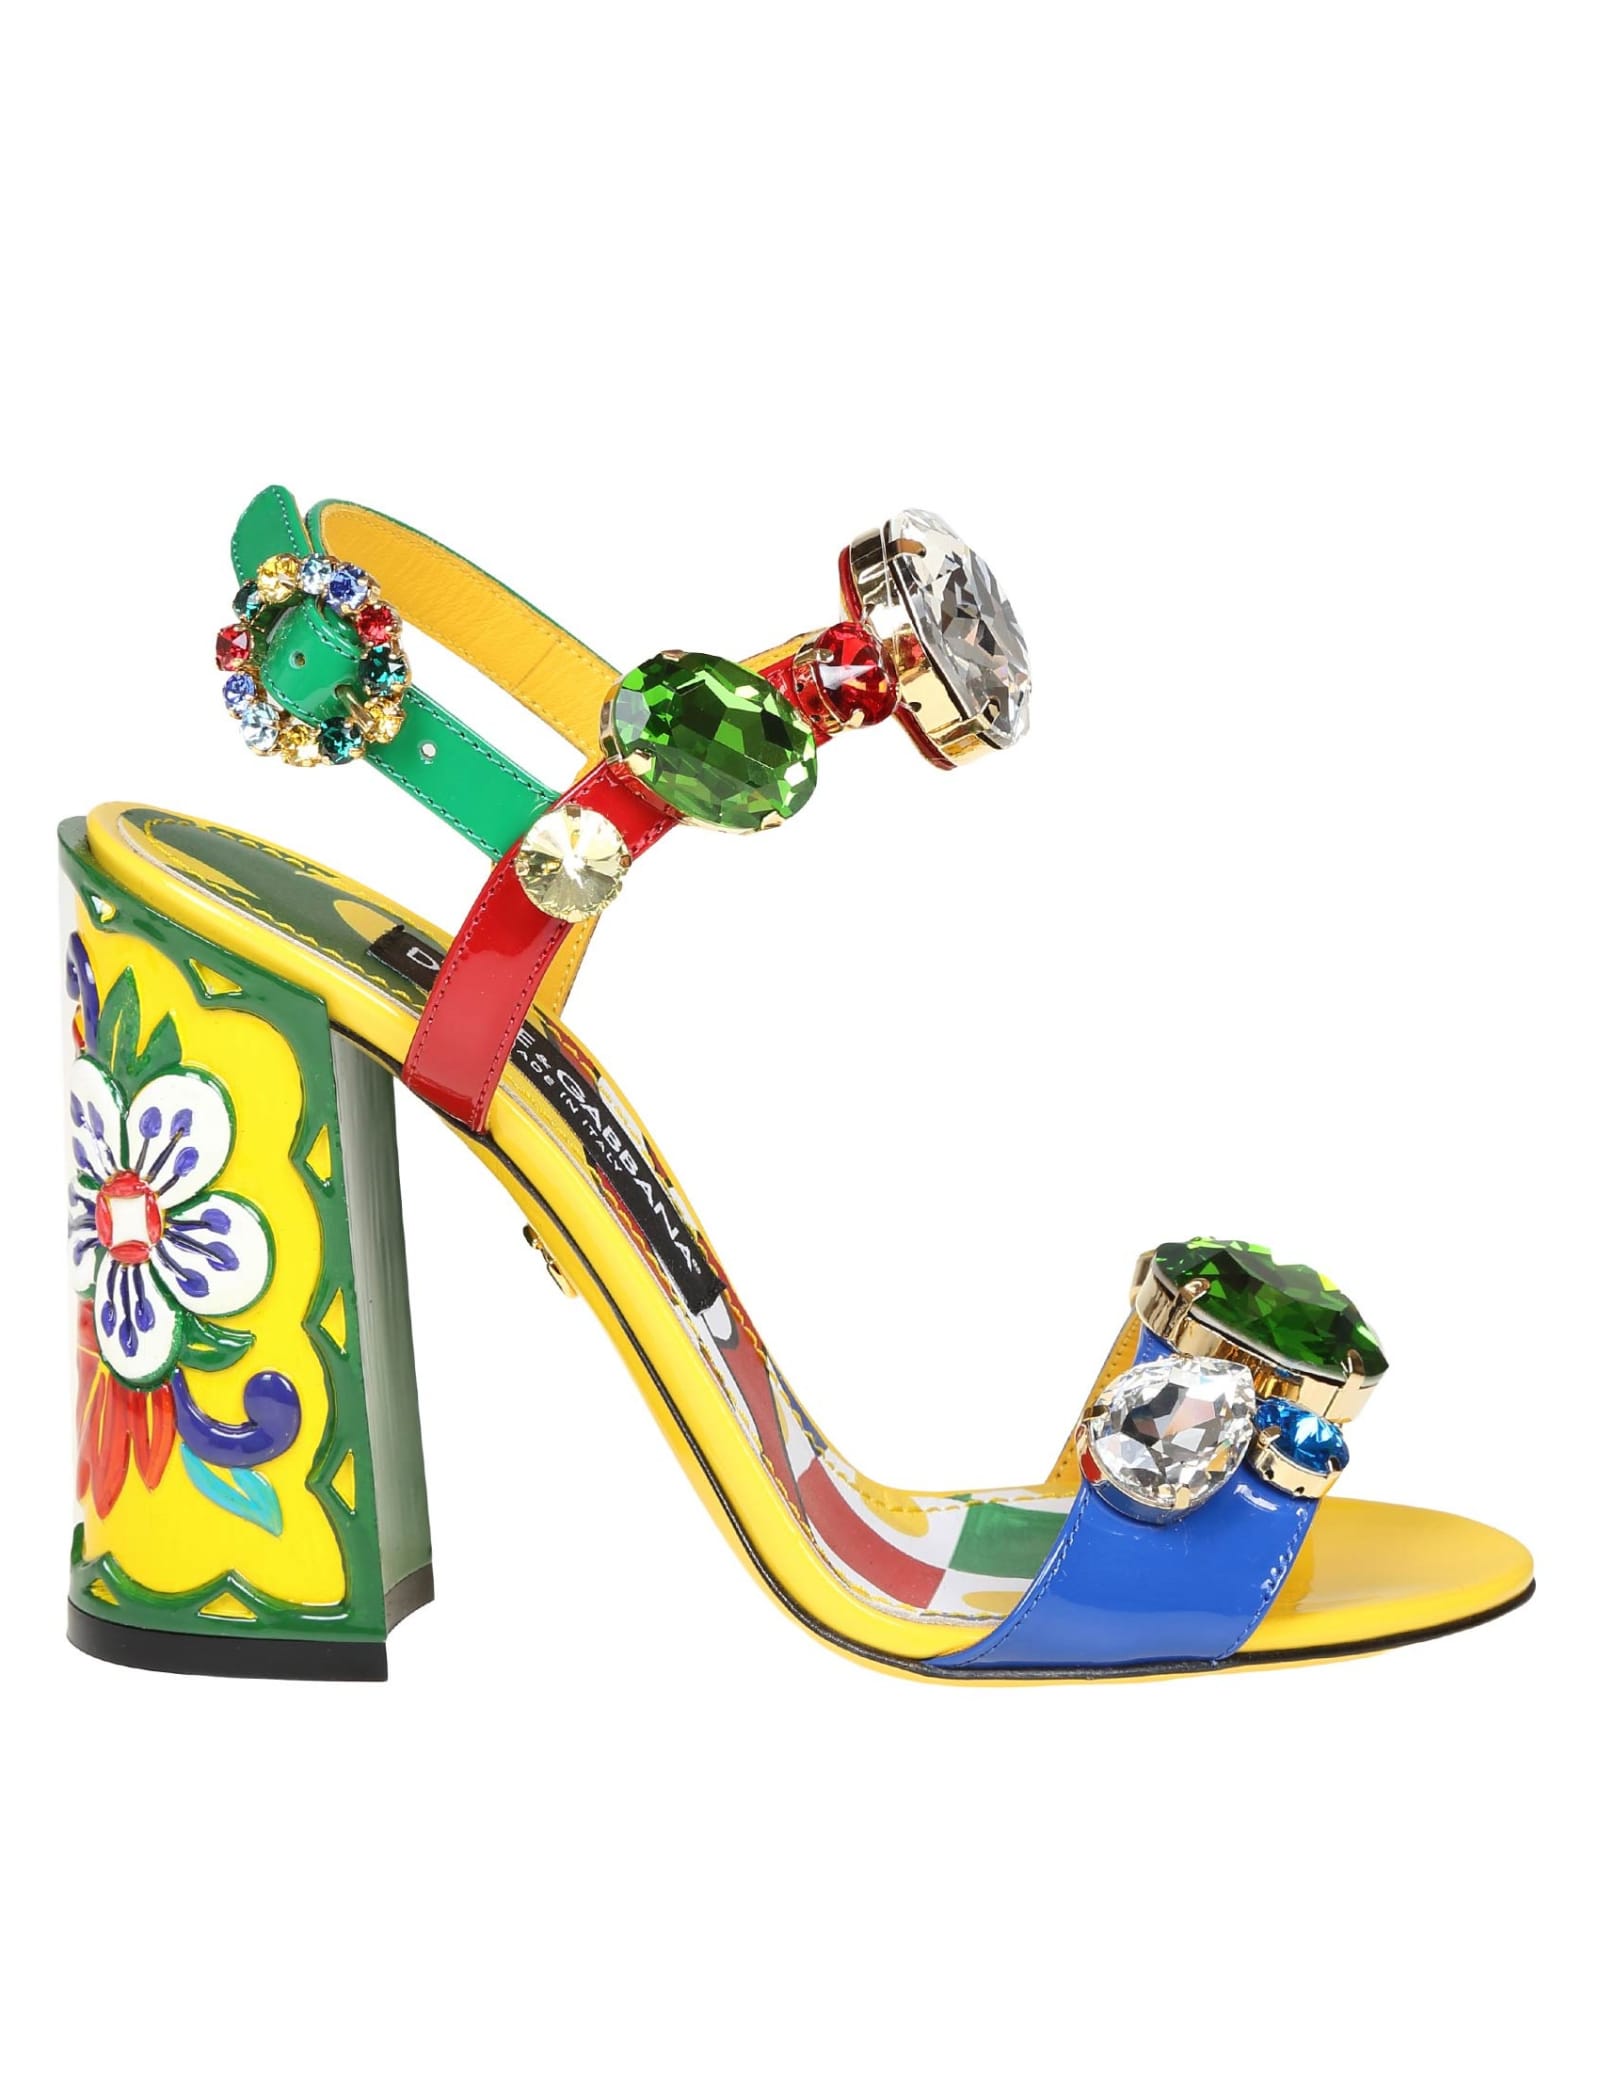 DOLCE & GABBANA KEIRA SANDAL WITH APPLIED STONES